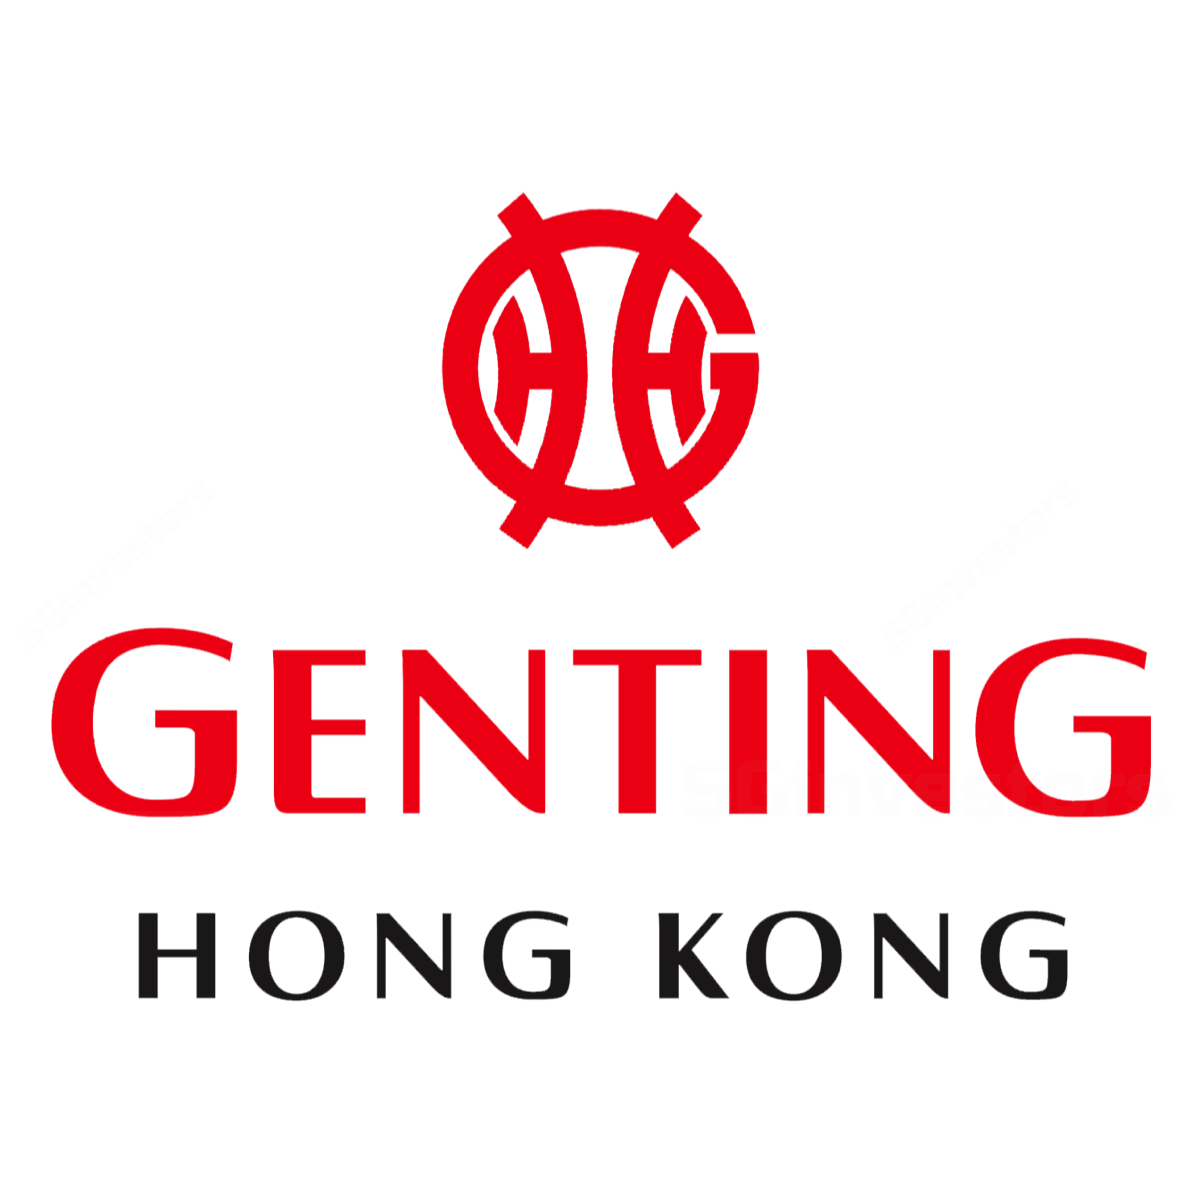 Genting Hong Kong (GENHK SP) - UOB Kay Hian 2017-12-15: Ceasing Coverage With Delisting From SGX